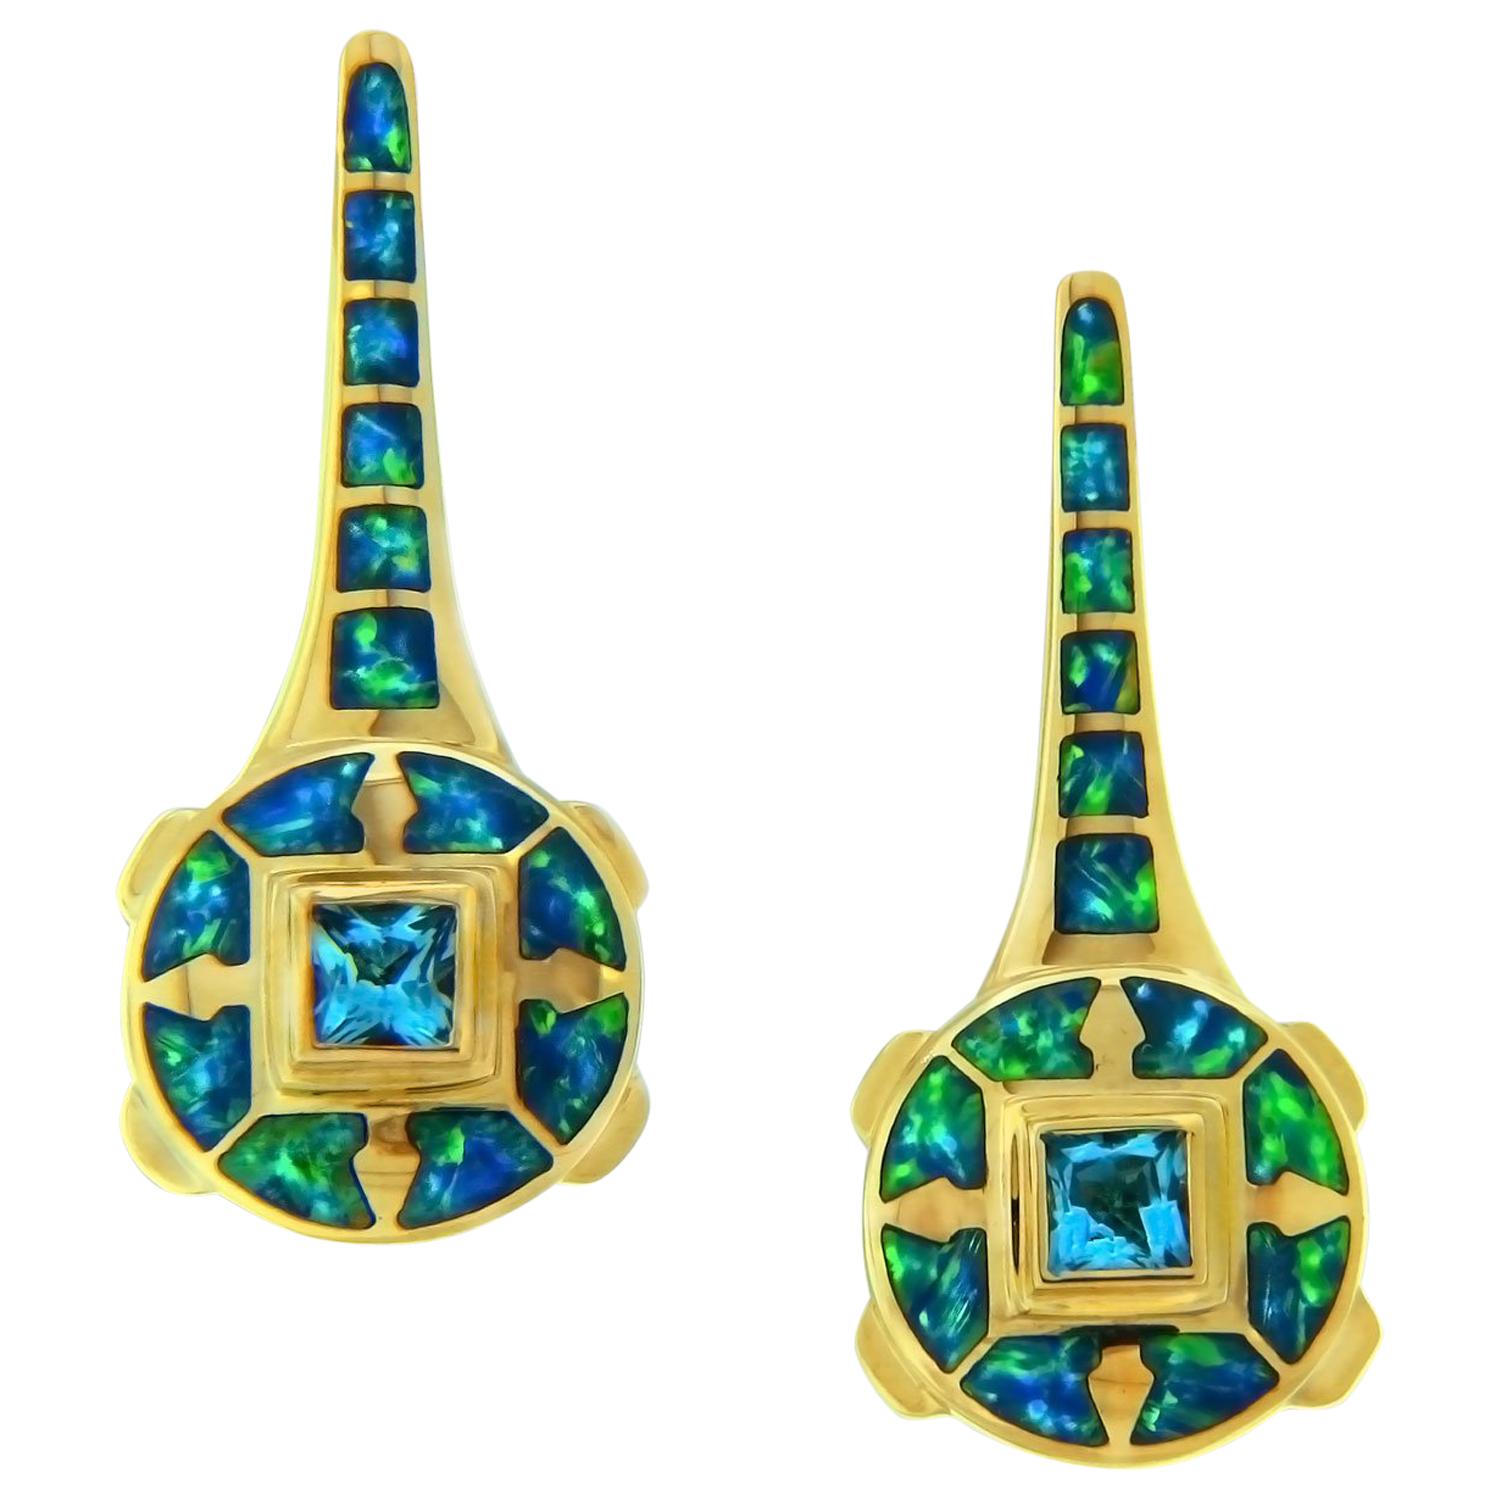 1.00 Carat Blue Topaz and Australian Opal Inlay "Ether" Earrings For Sale